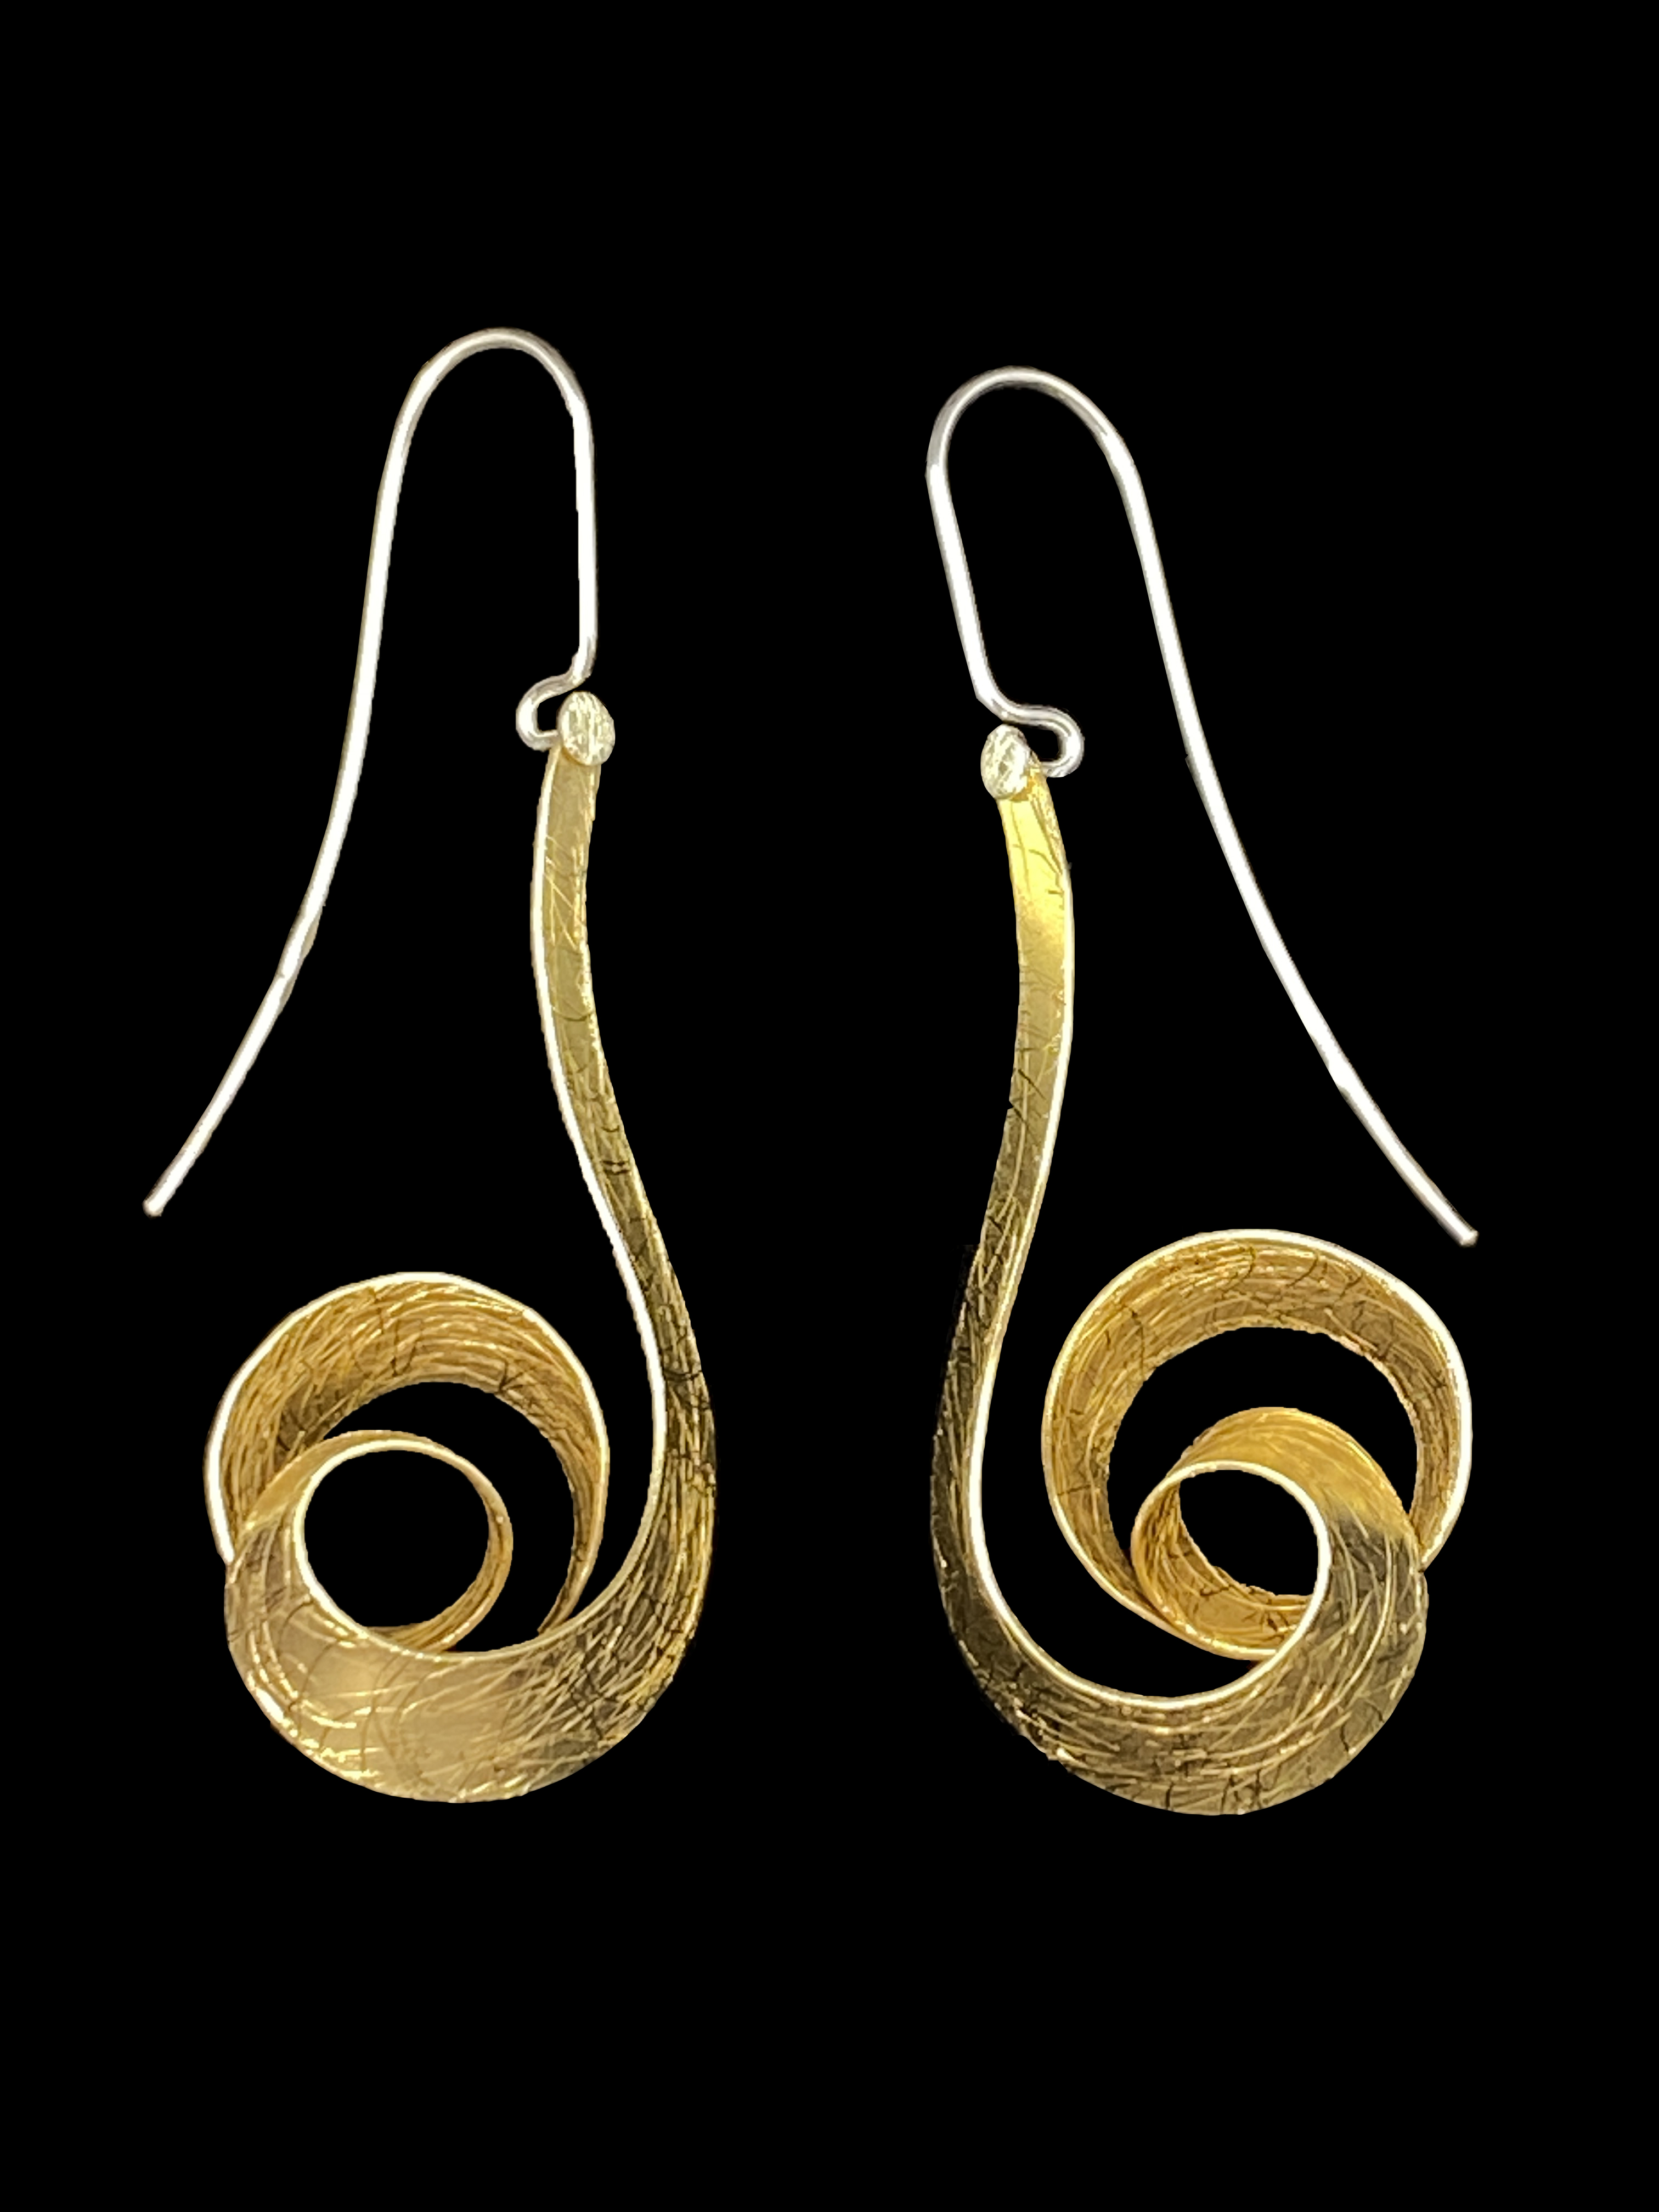 Gold Plated Sterling Silver Key Note Earrings (EHC345V) - Sold